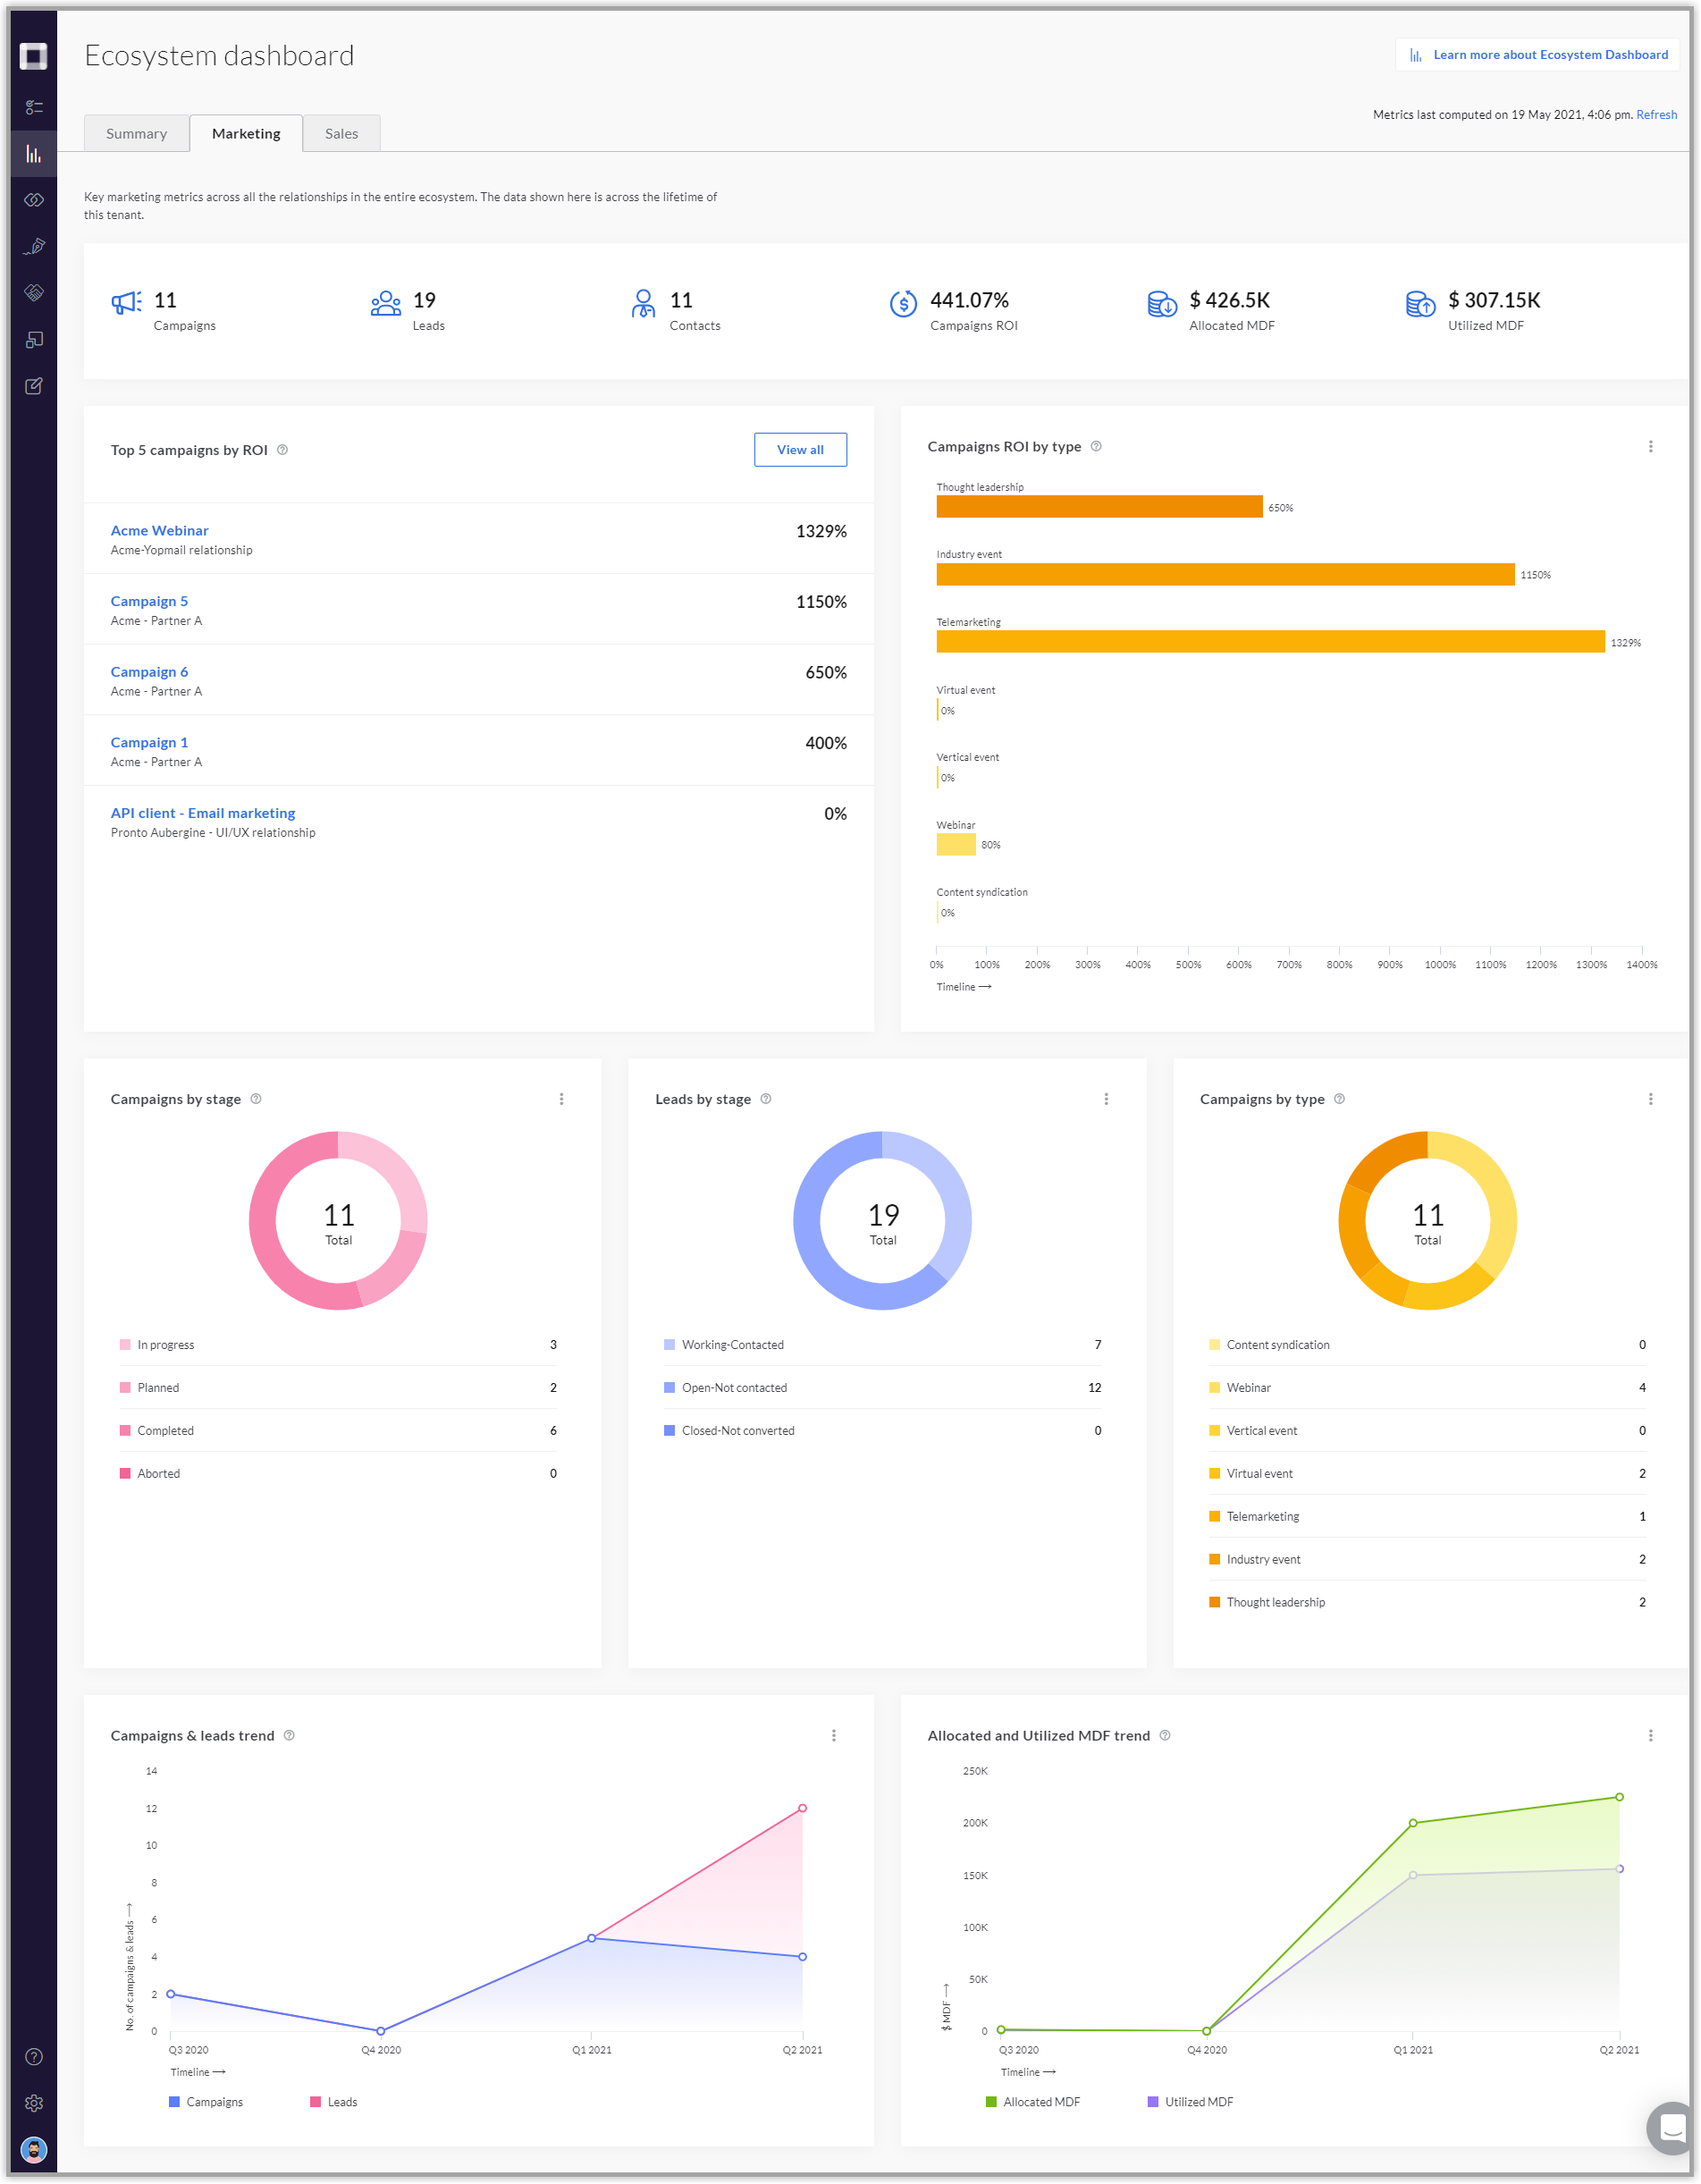 5._Ecosystem_Dashboard_-_Marketing_-_Data_populated.png